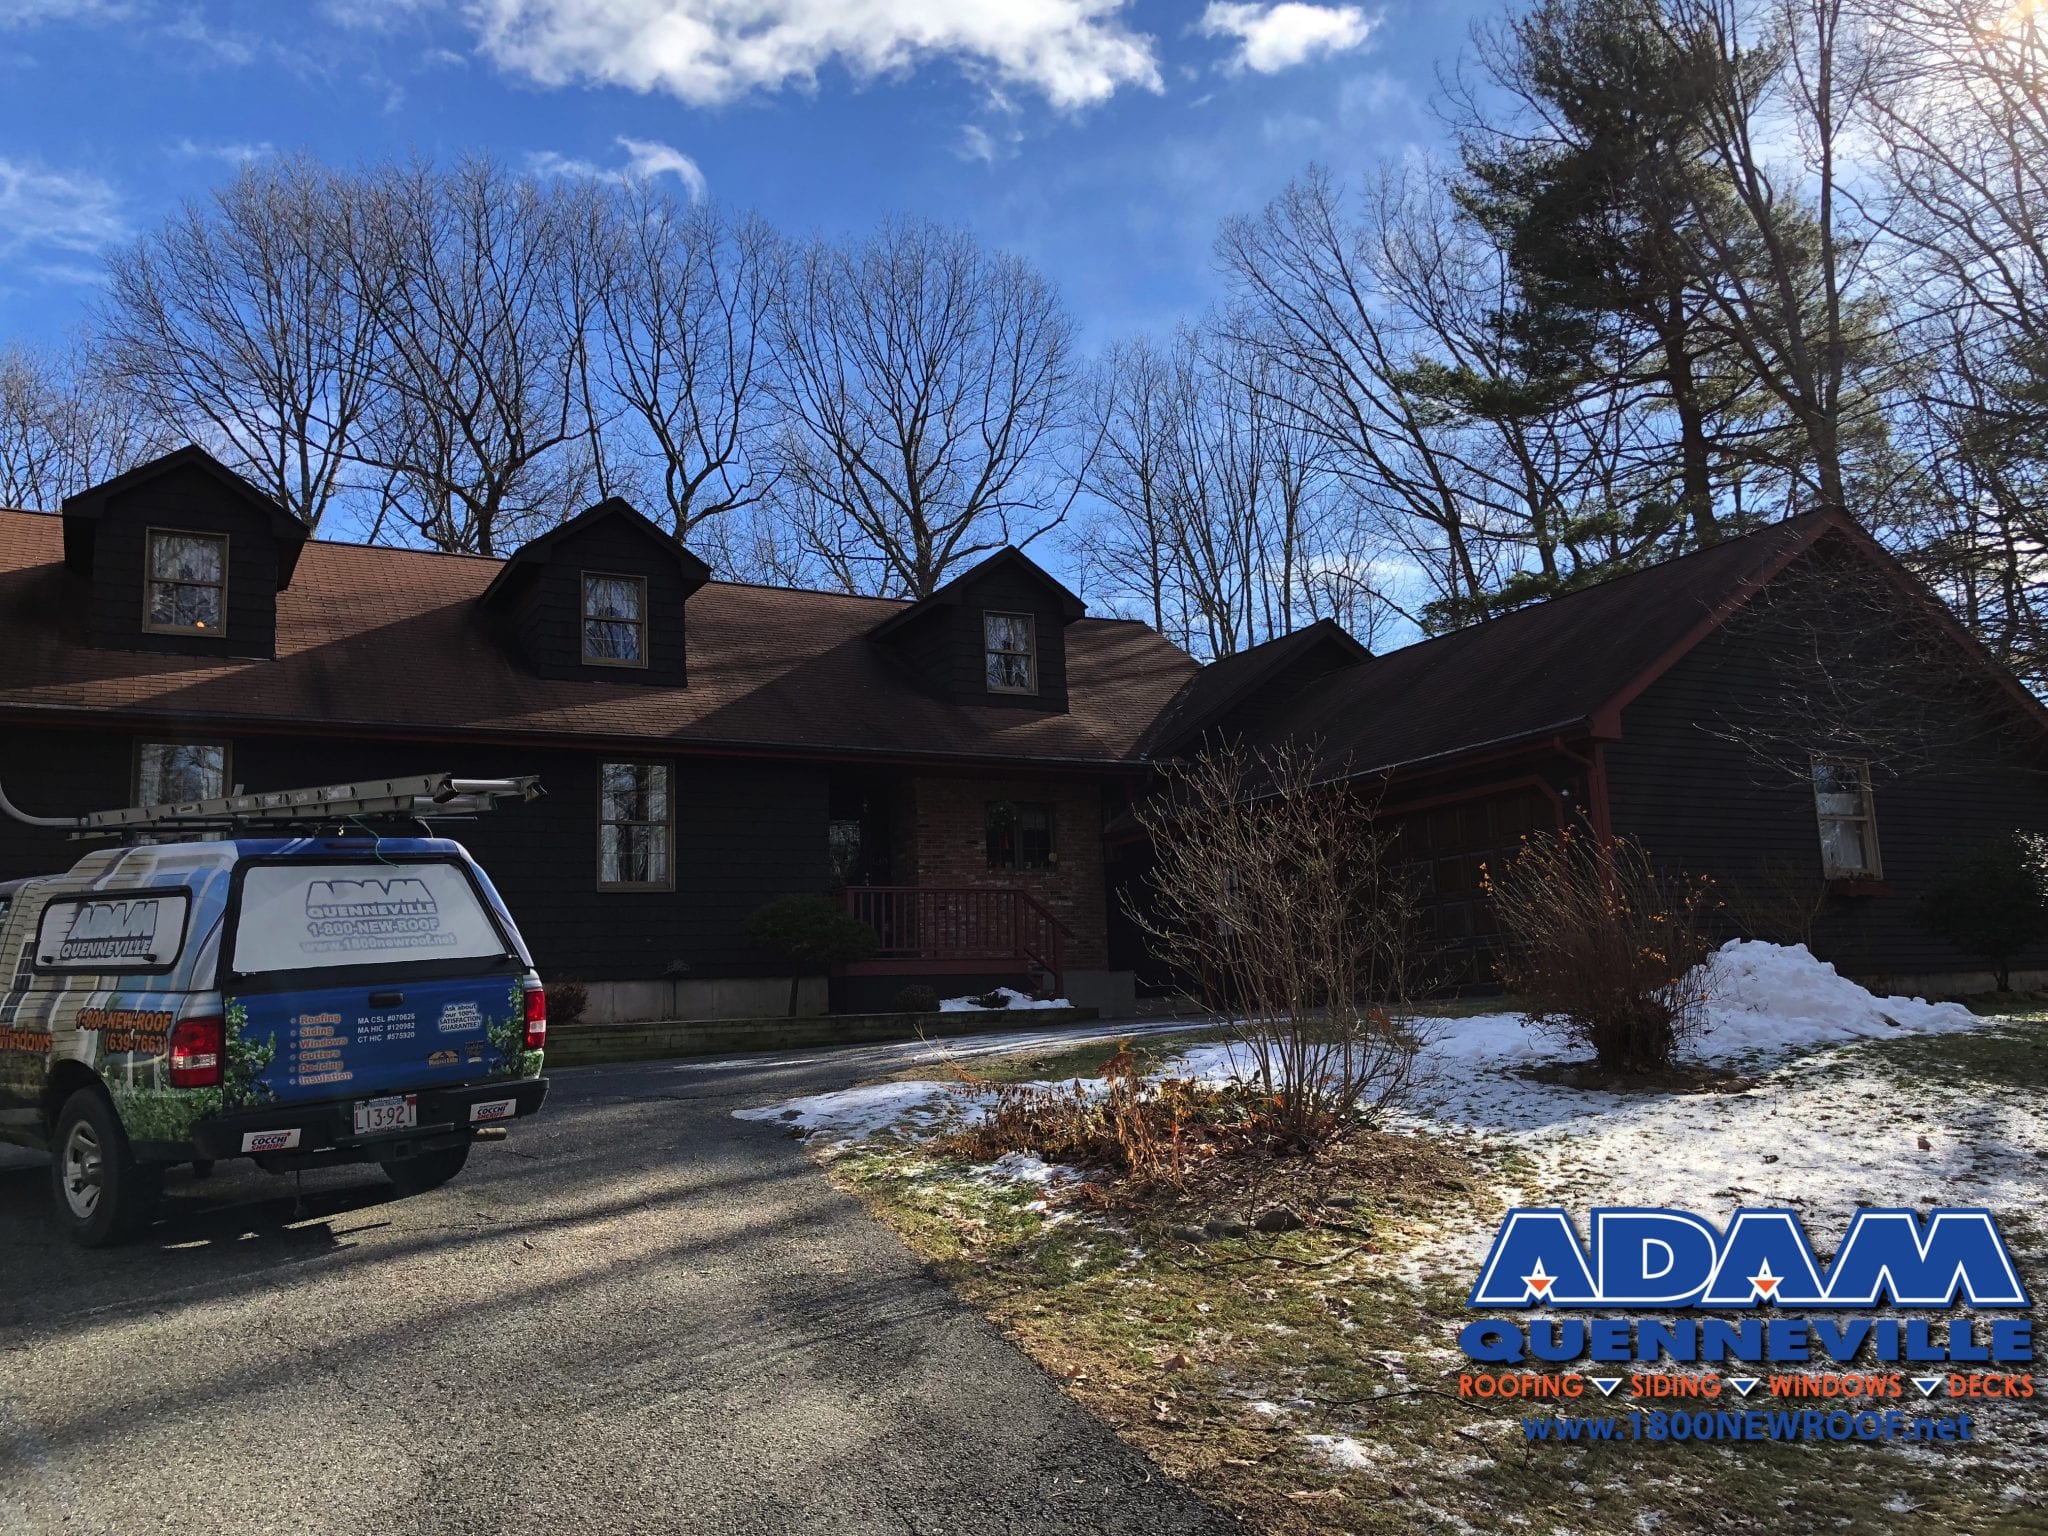 This is a photo of a completed roofing and riding replacement project with brown shingles.